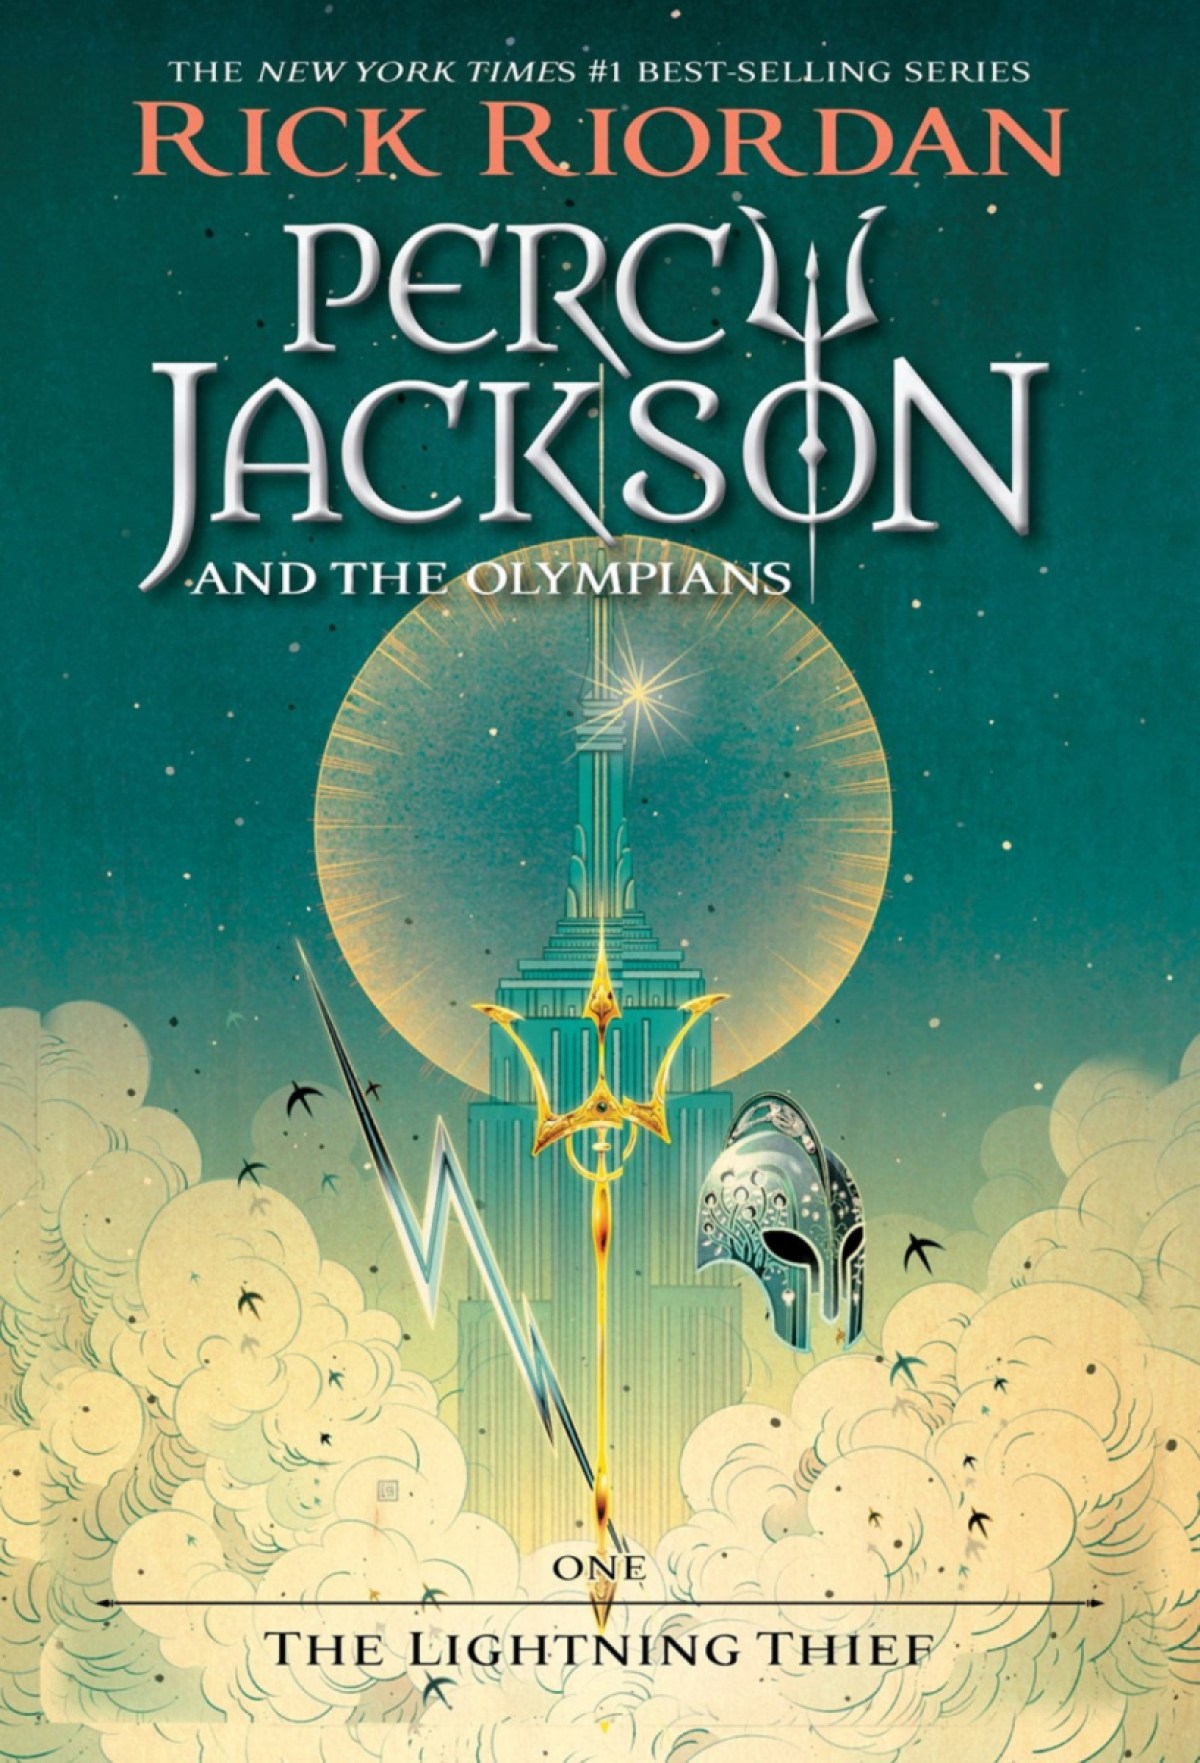 Percy Jackson and the Olympians Book 1 - The Lightning Thief cover art (Disney Hyperion)